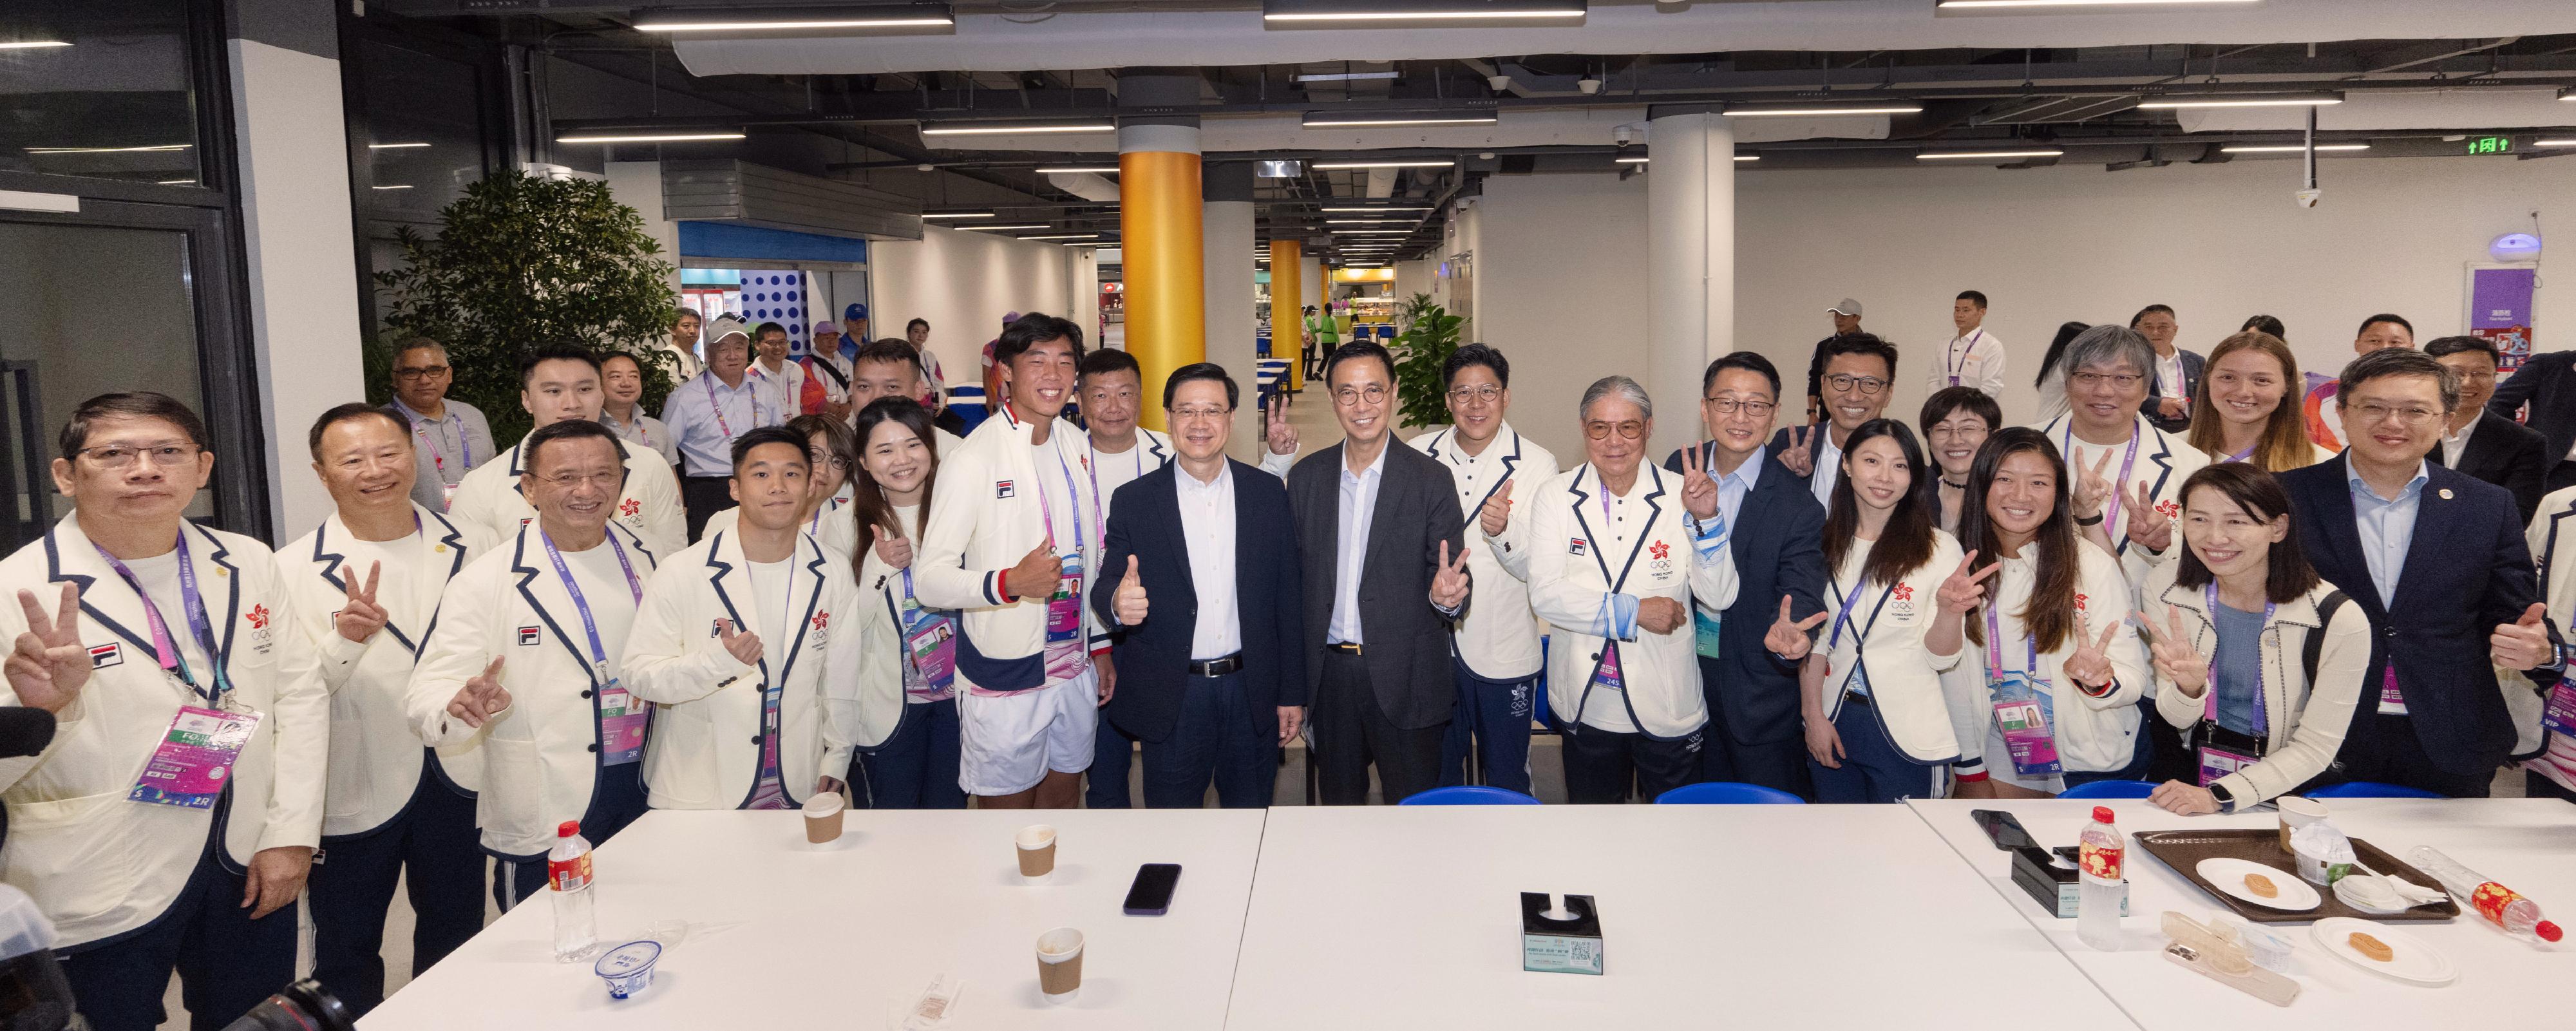 The Chief Executive, Mr John Lee, led a delegation of the Hong Kong Special Administrative Region Government to attend the opening ceremony of the 19th Asian Games Hangzhou (Asian Games) today (September 22). Photo shows Mr Lee (front row, eighth right); the Secretary for Culture, Sports and Tourism, Mr Kevin Yeung (front row, seventh right); the Director of the Chief Executive's Office, Ms Carol Yip (front row, first right); the Director of Leisure and Cultural Services, Mr Vincent Liu (front row, fourth right); the President of the Sports Federation & Olympic Committee of Hong Kong, China, Mr Timothy Fok (front row, fifth right); and the Chef de Mission of the Hong Kong, China Delegation to the Asian Games, Mr Kenneth Fok (front row, sixth right), with Hong Kong athletes.